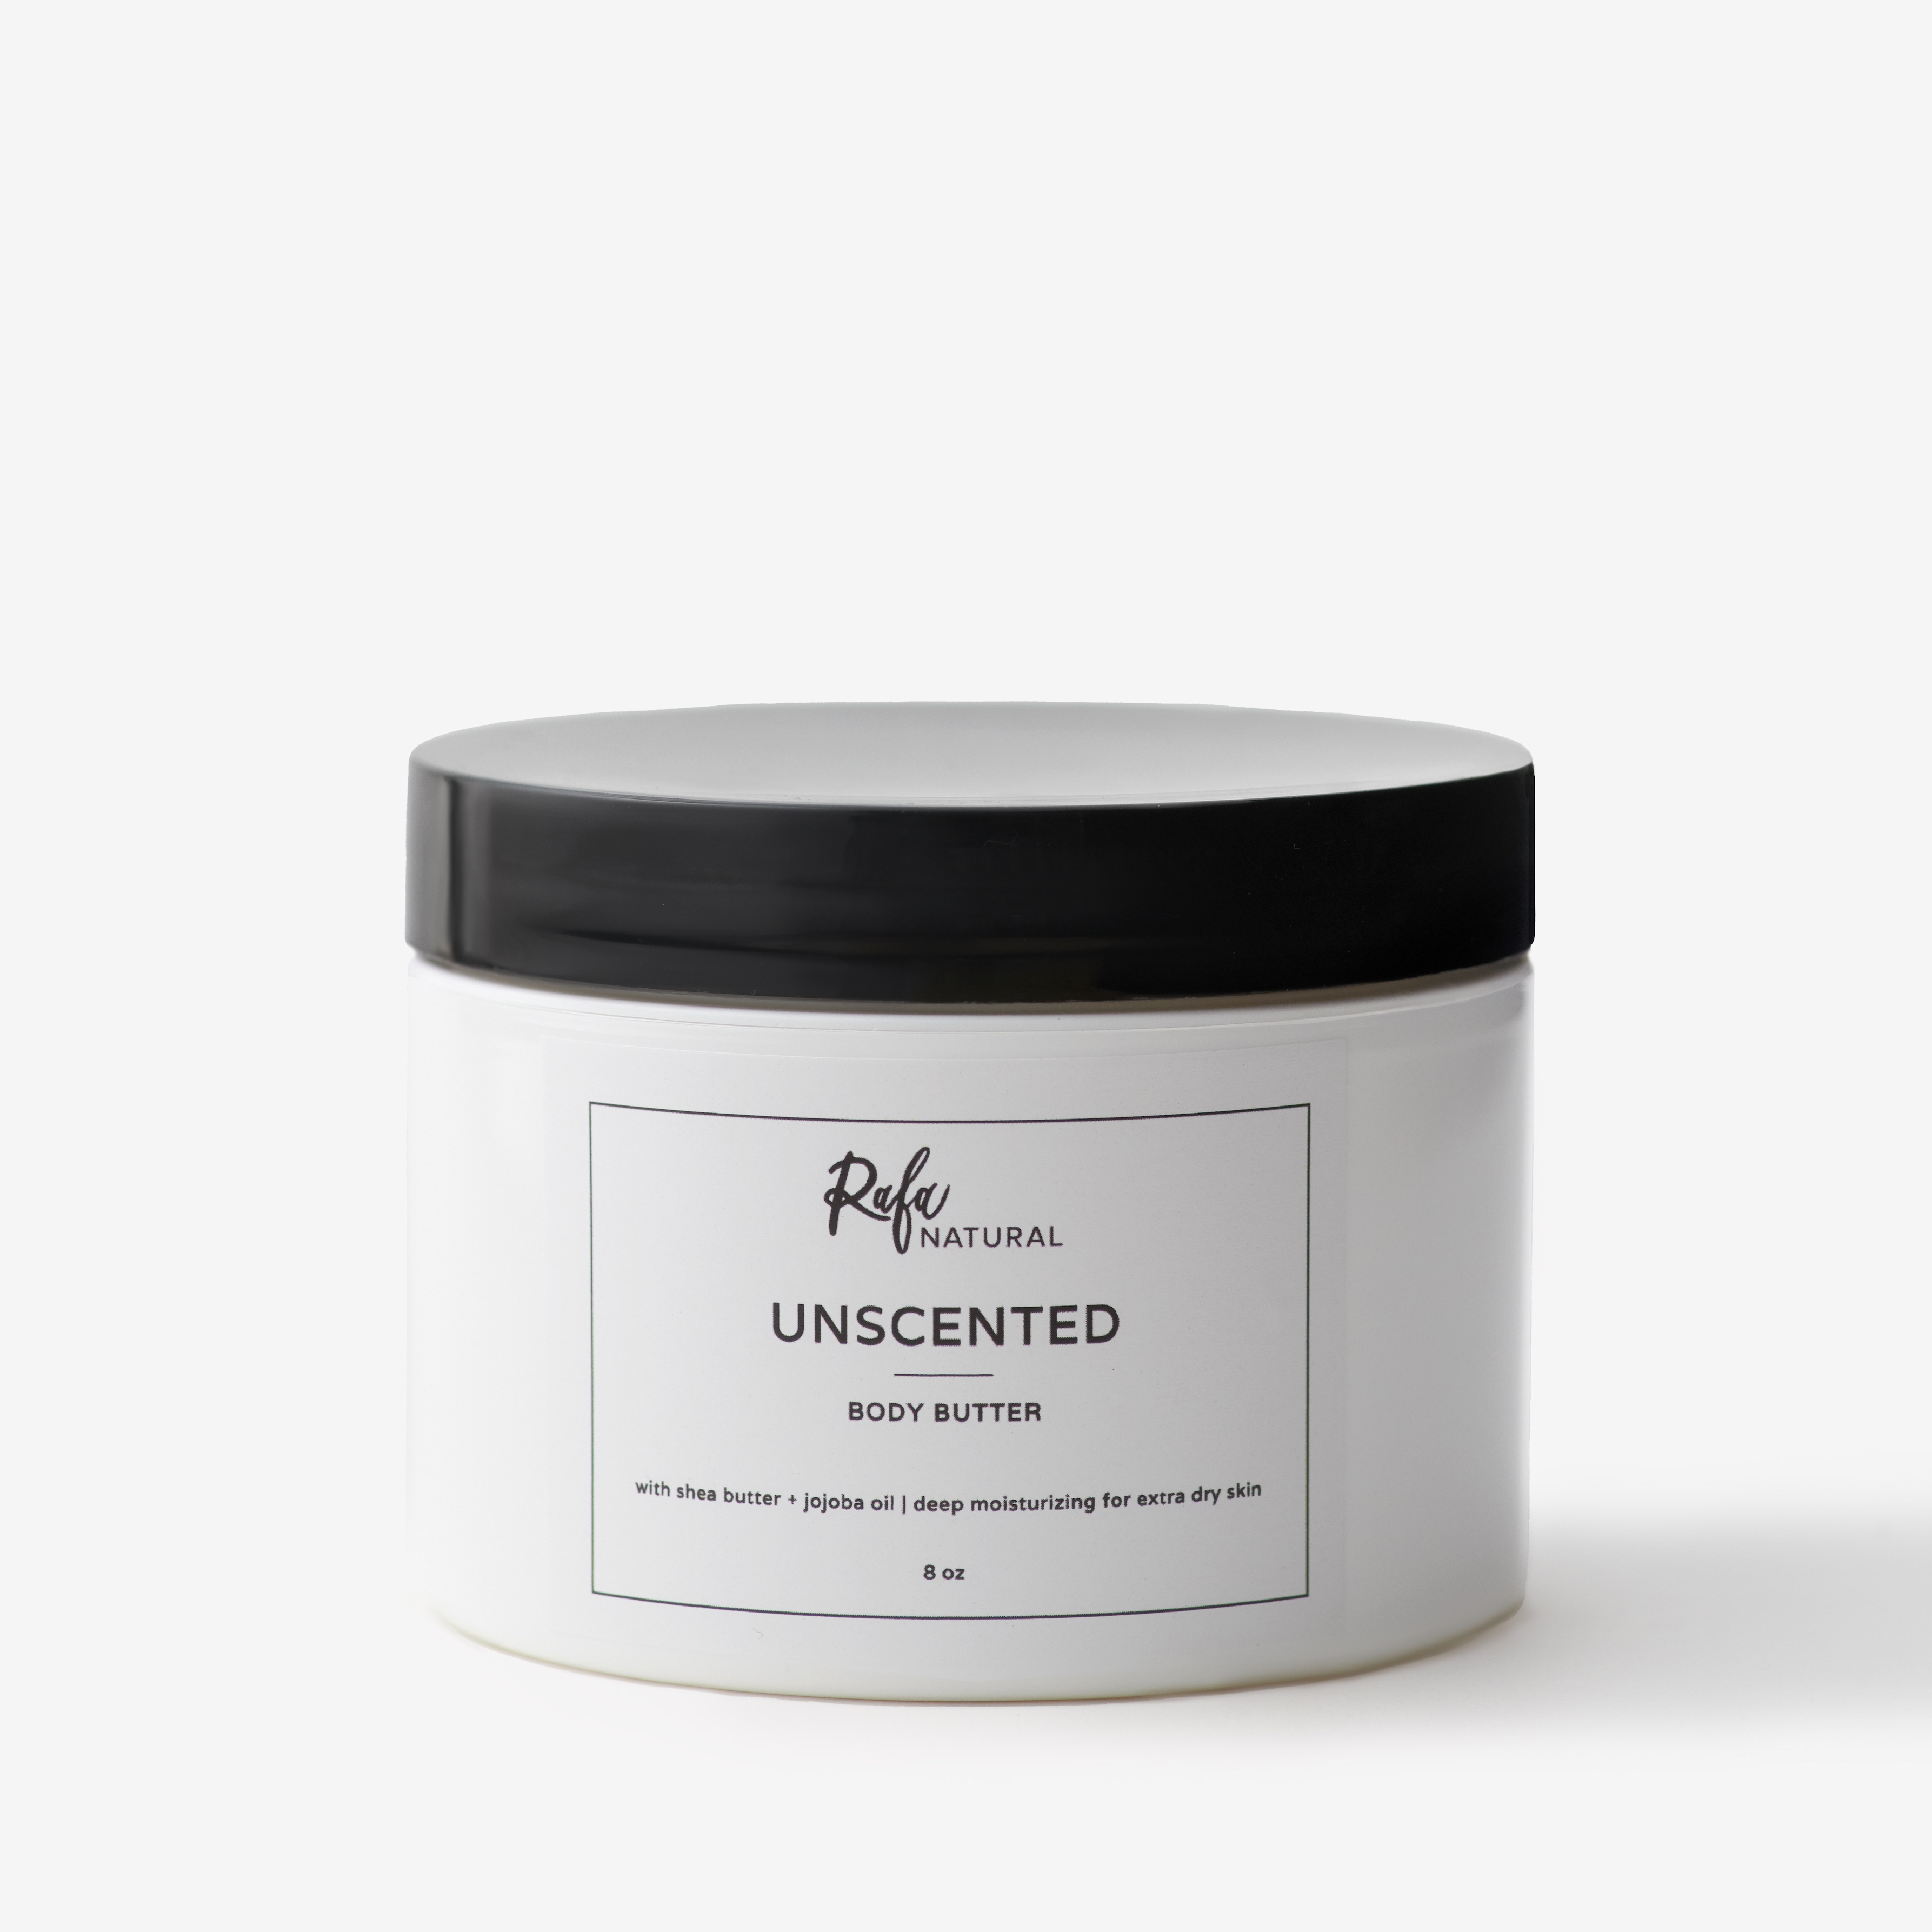 8oz. Unscented Body Butter